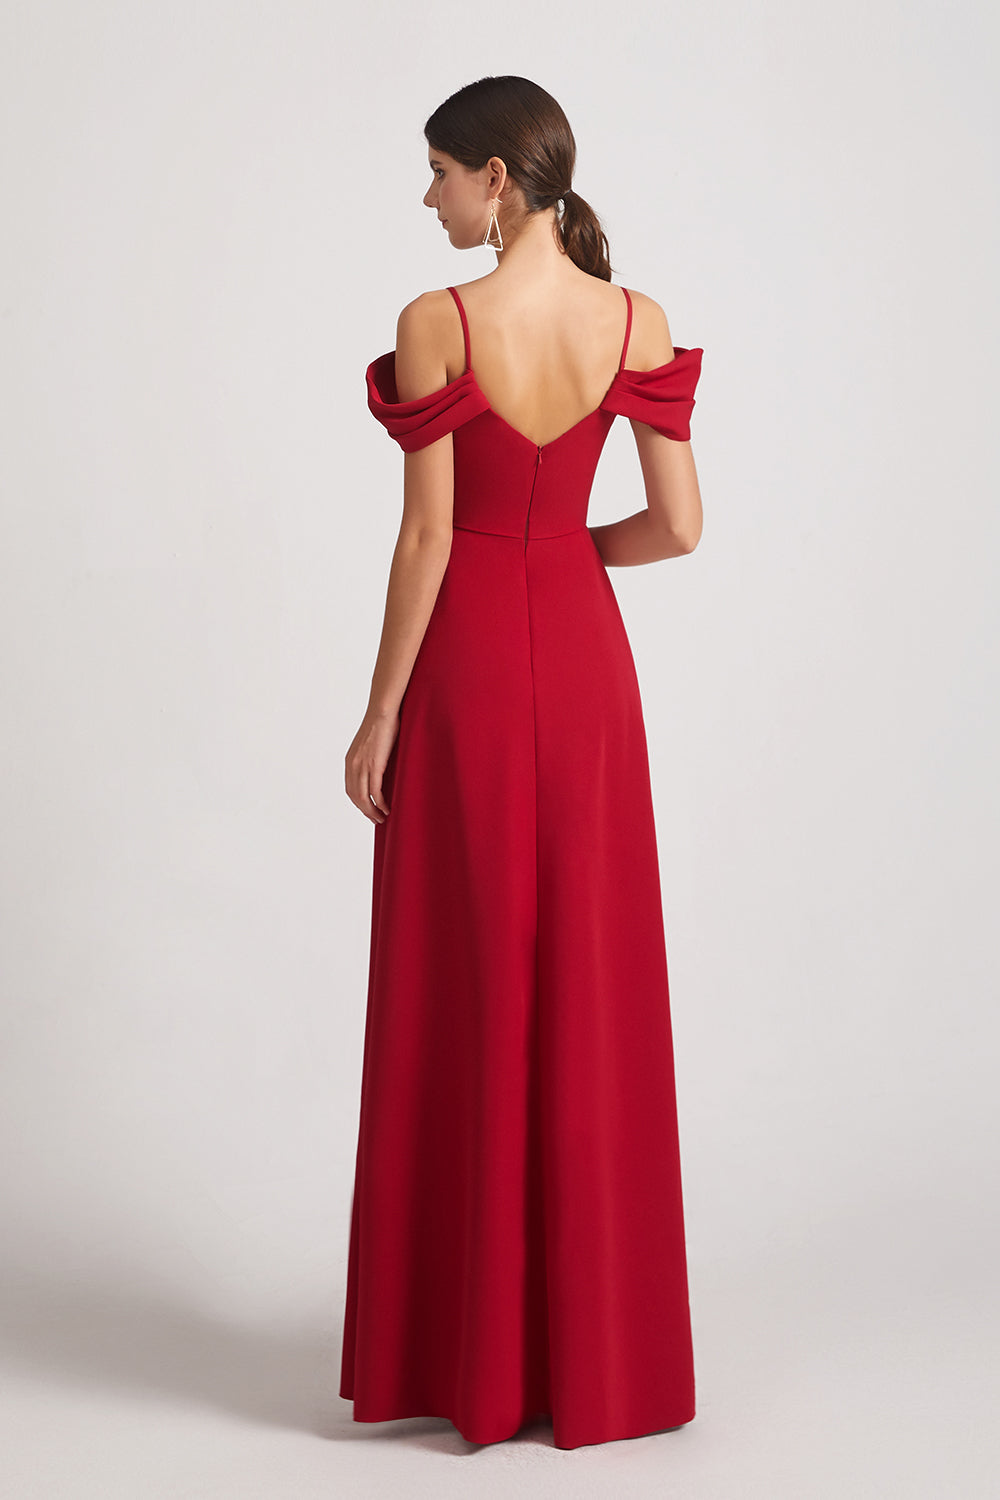 low cut back bridesmaid gowns